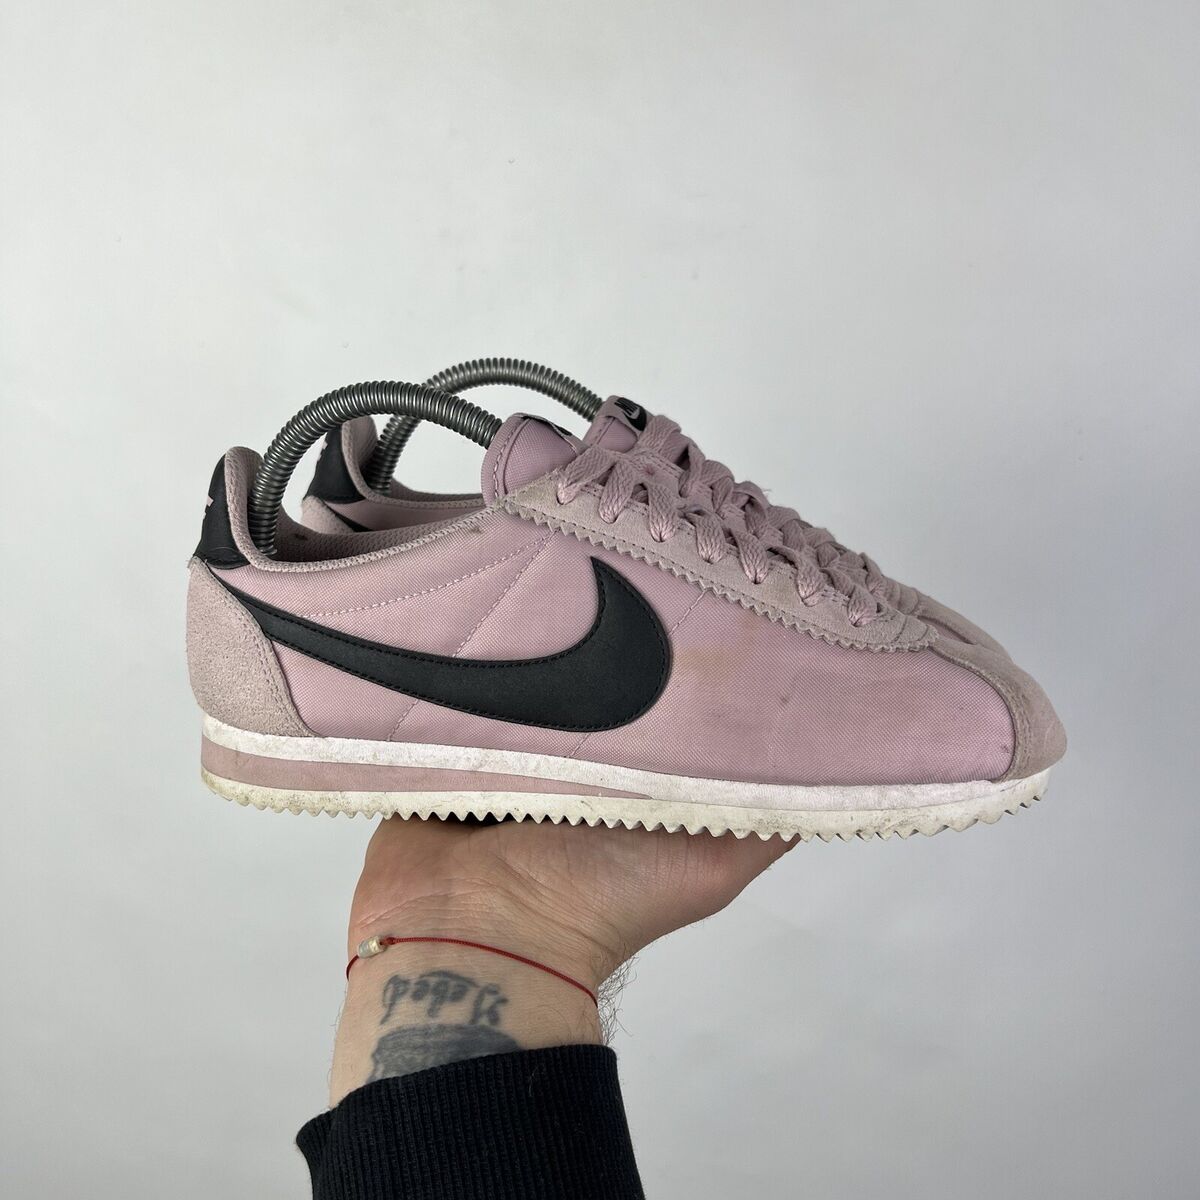 Nike Cortez Sneakers Pink Size EUR 38,5 US 7,5 UK 5 Casual Shoes | eBay